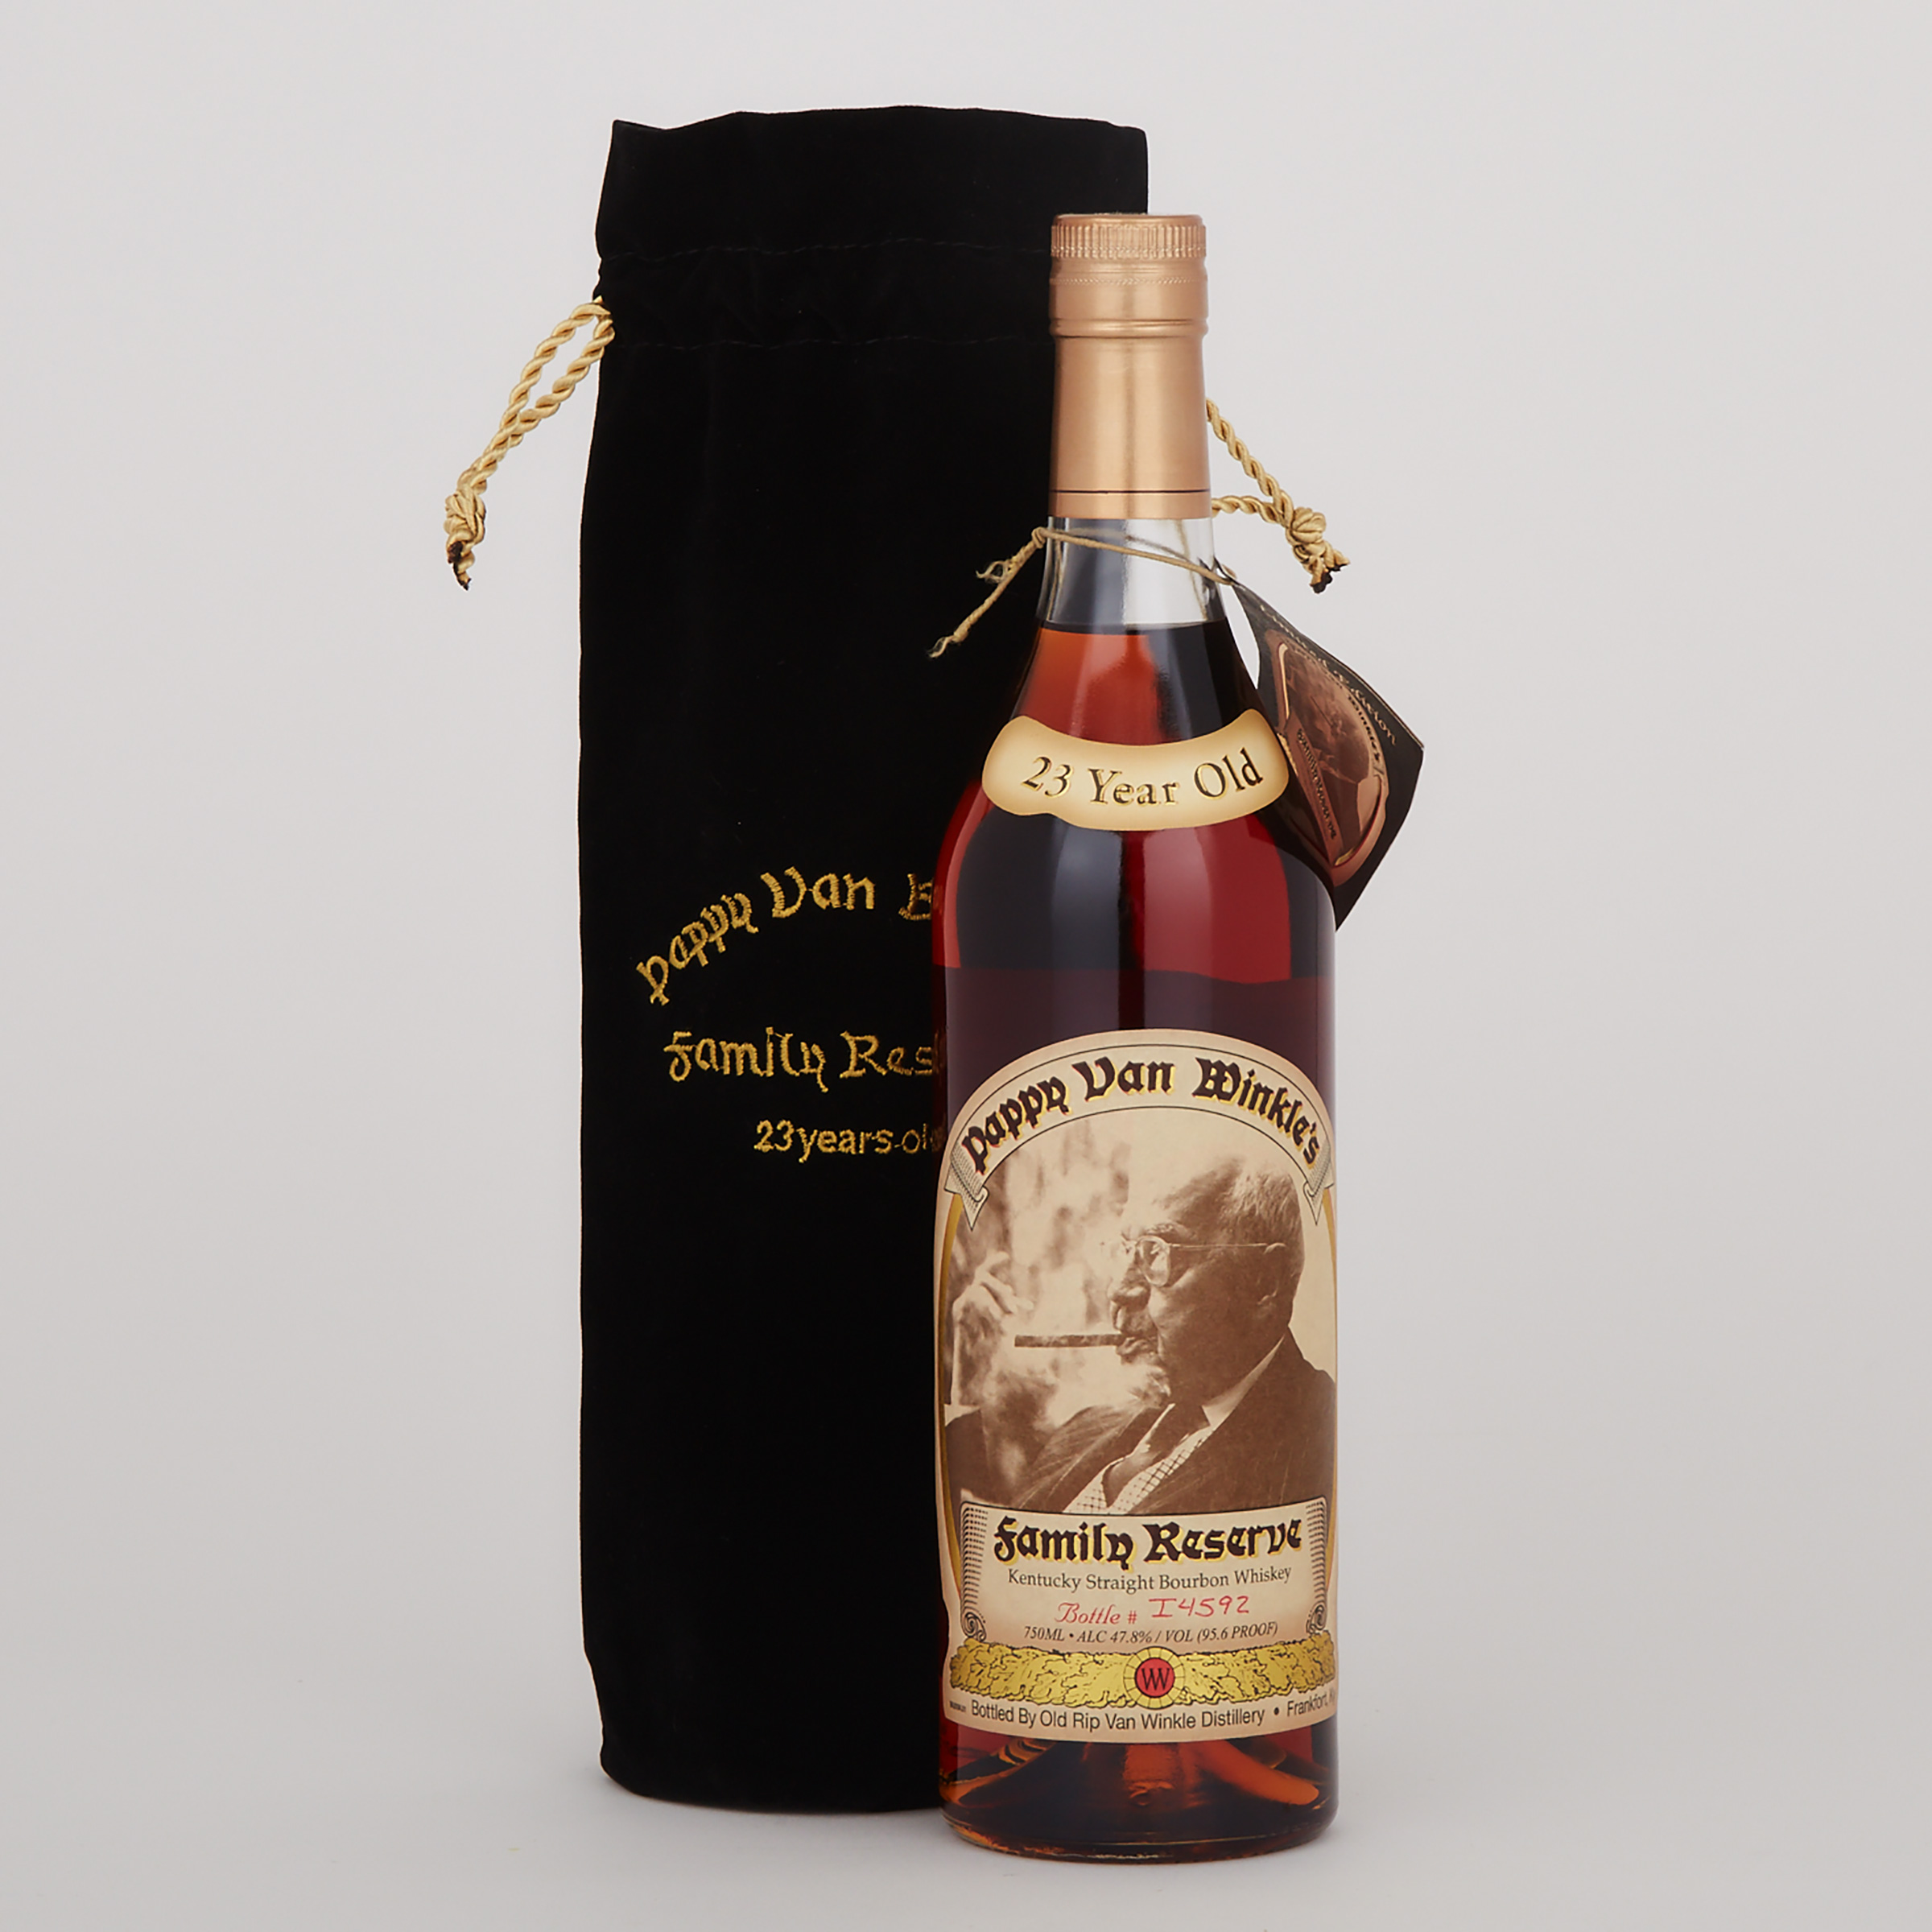 PAPPY VAN WINKLE’S FAMILY RESERVE KENTUCKY STRAIGHT BOURBON WHISKEY 23 YEARS (ONE 750 ML)